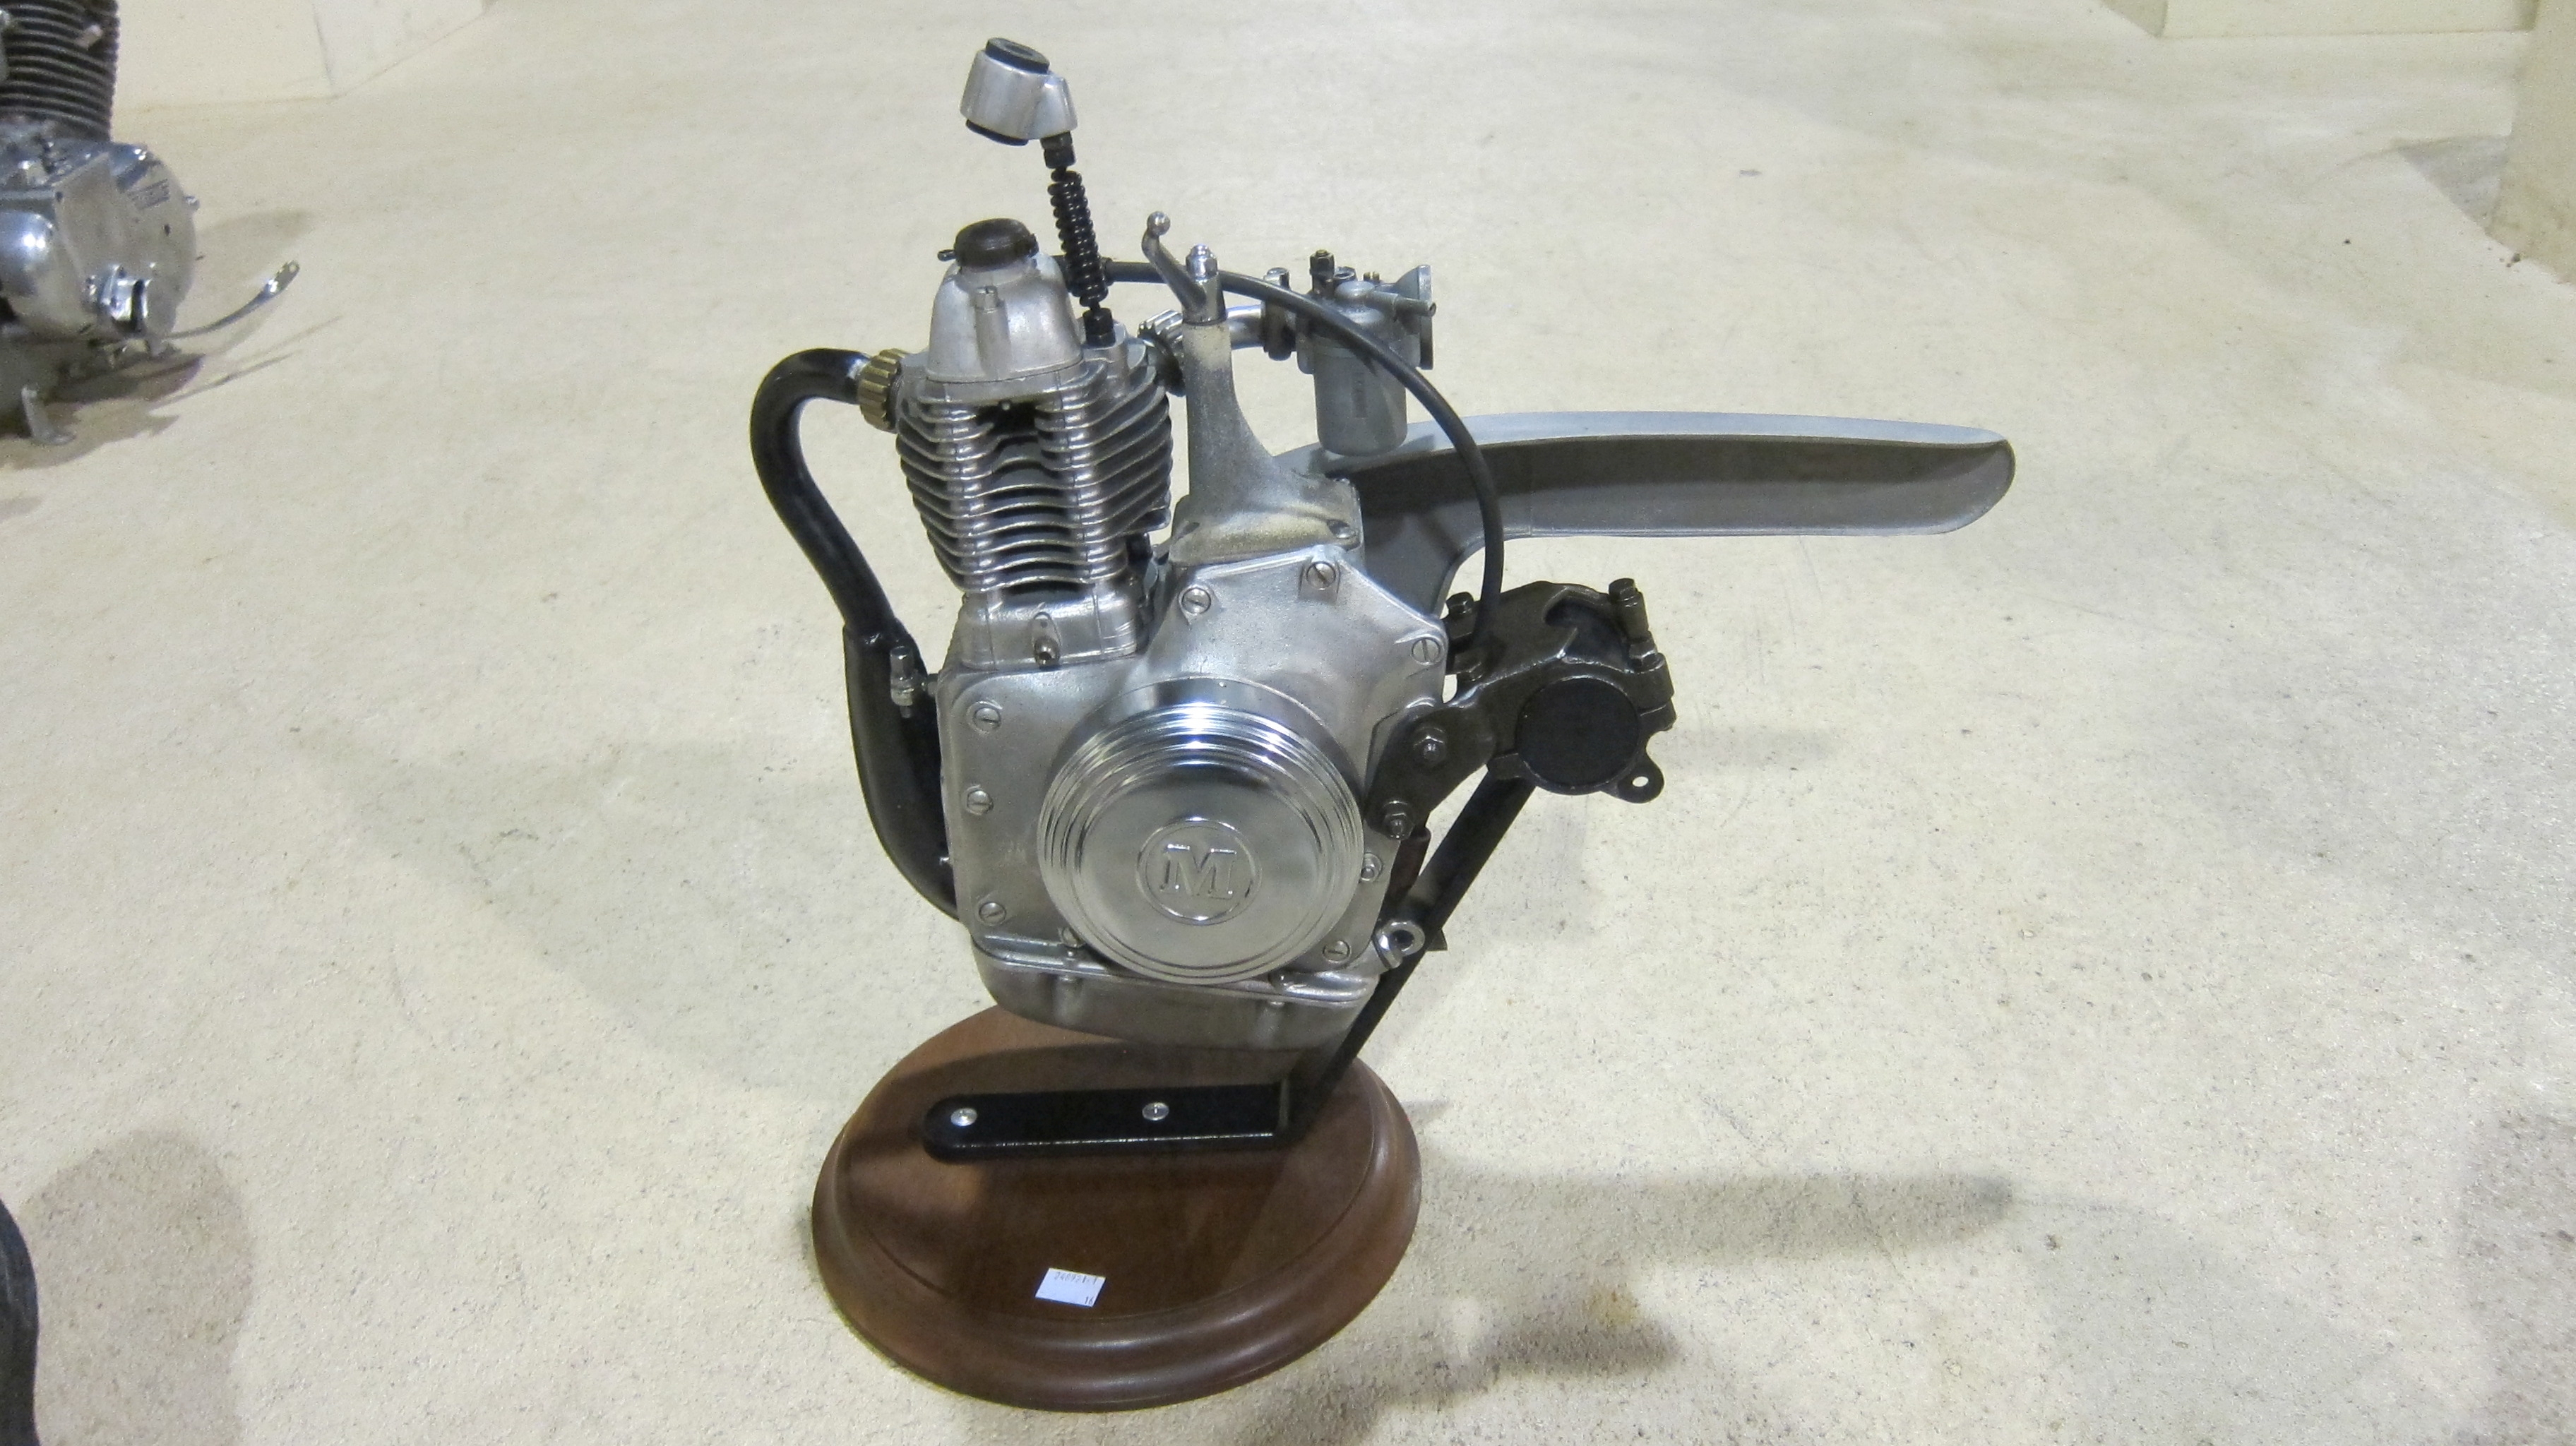 A Motomic clip-on motorcycle engine